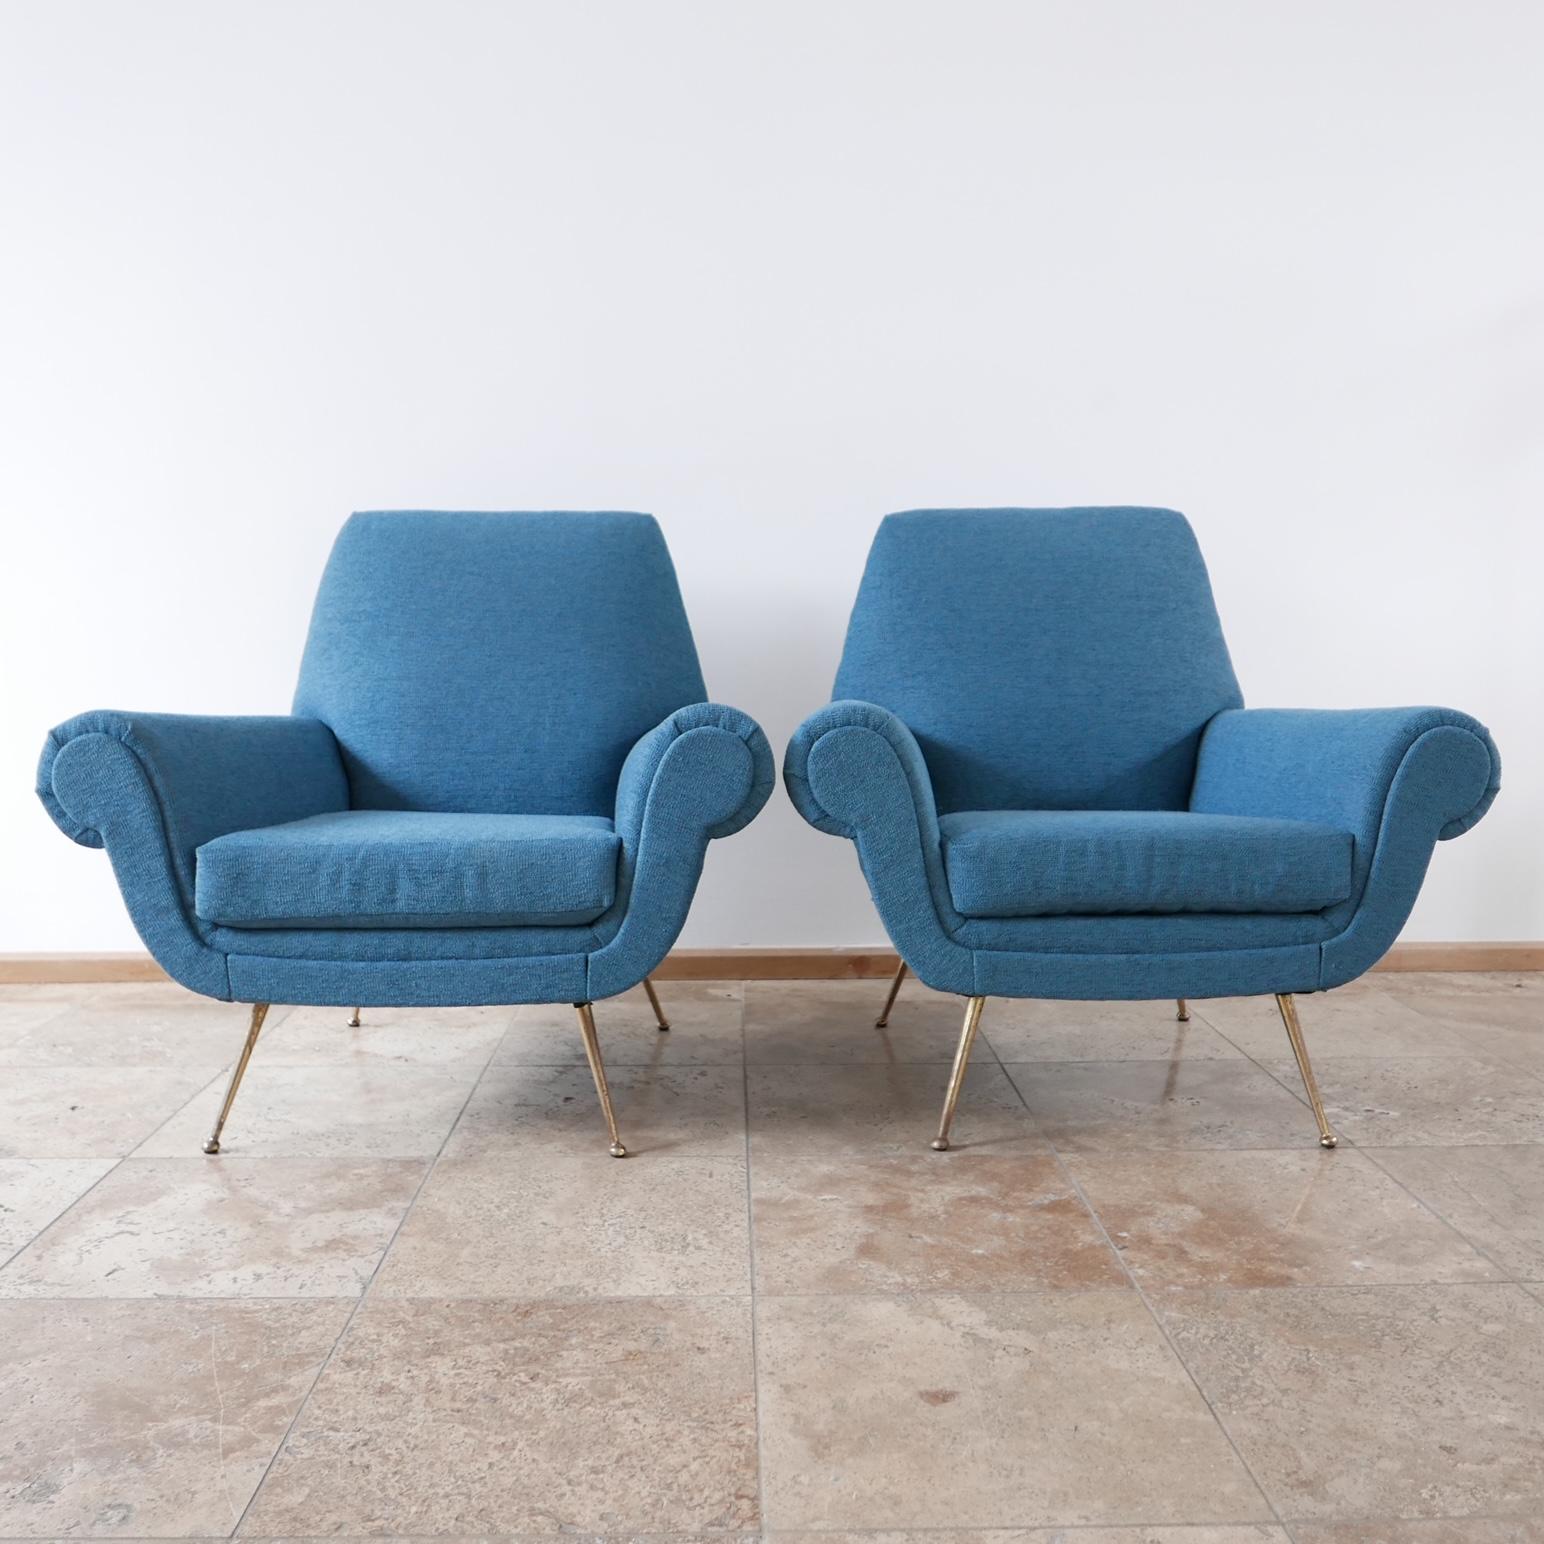 A pair of generous armchairs, newly upholstered in a blue fabric, raised over brass legs.

Italy, c1970s.

Comfy and timeless.

Price is for the pair.

Good vintage condition, scuffs and wear commensurate with age.

Location: London Gallery. 